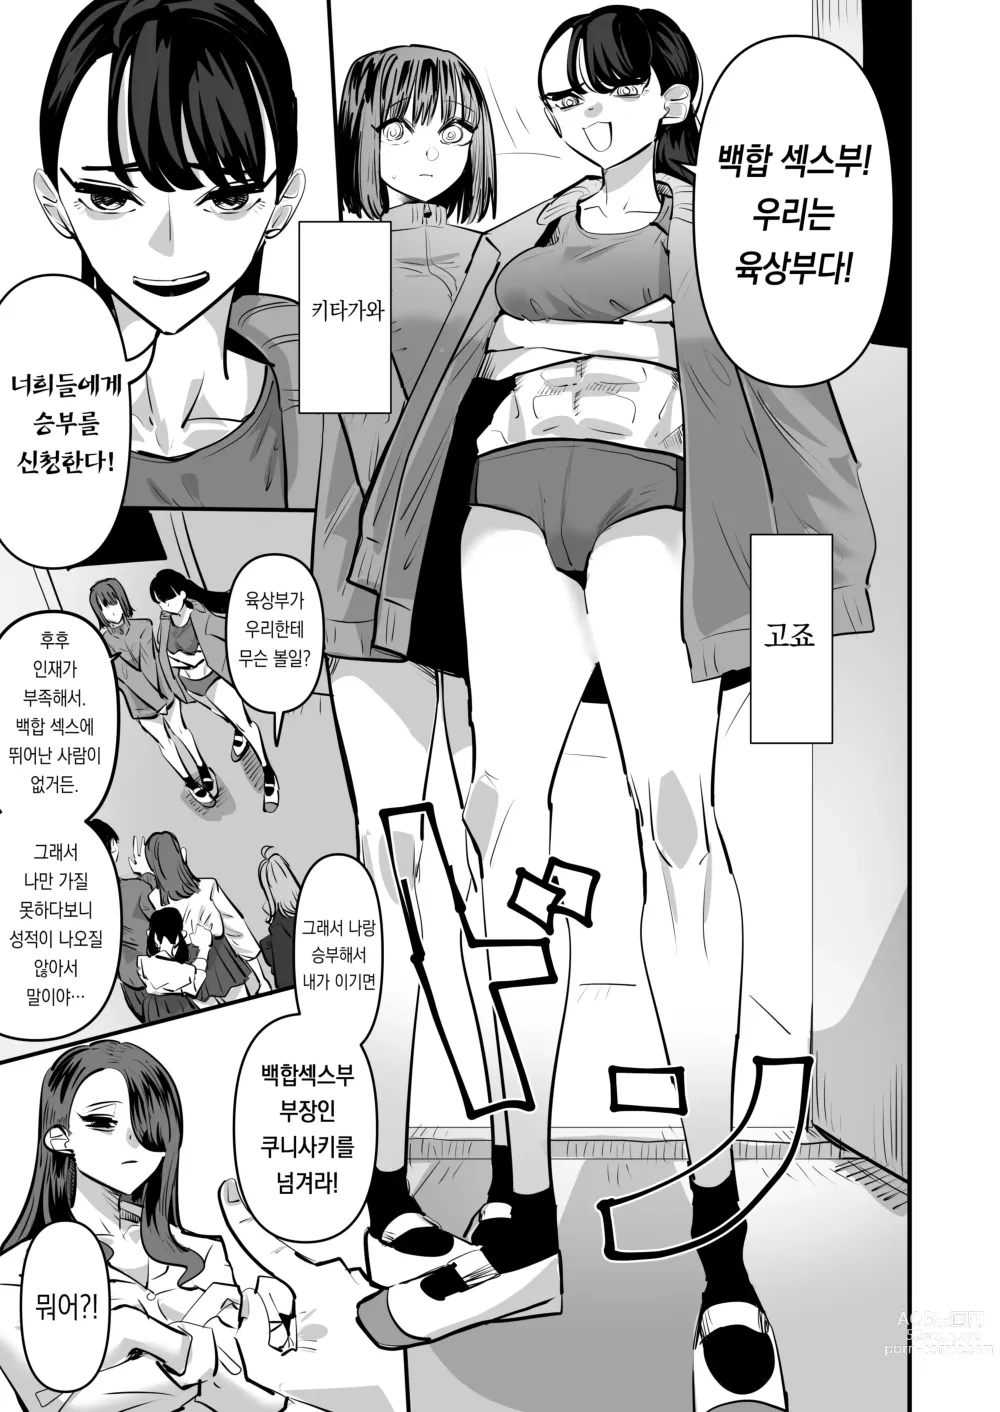 Page 9 of doujinshi 육상부VS백합섹스부